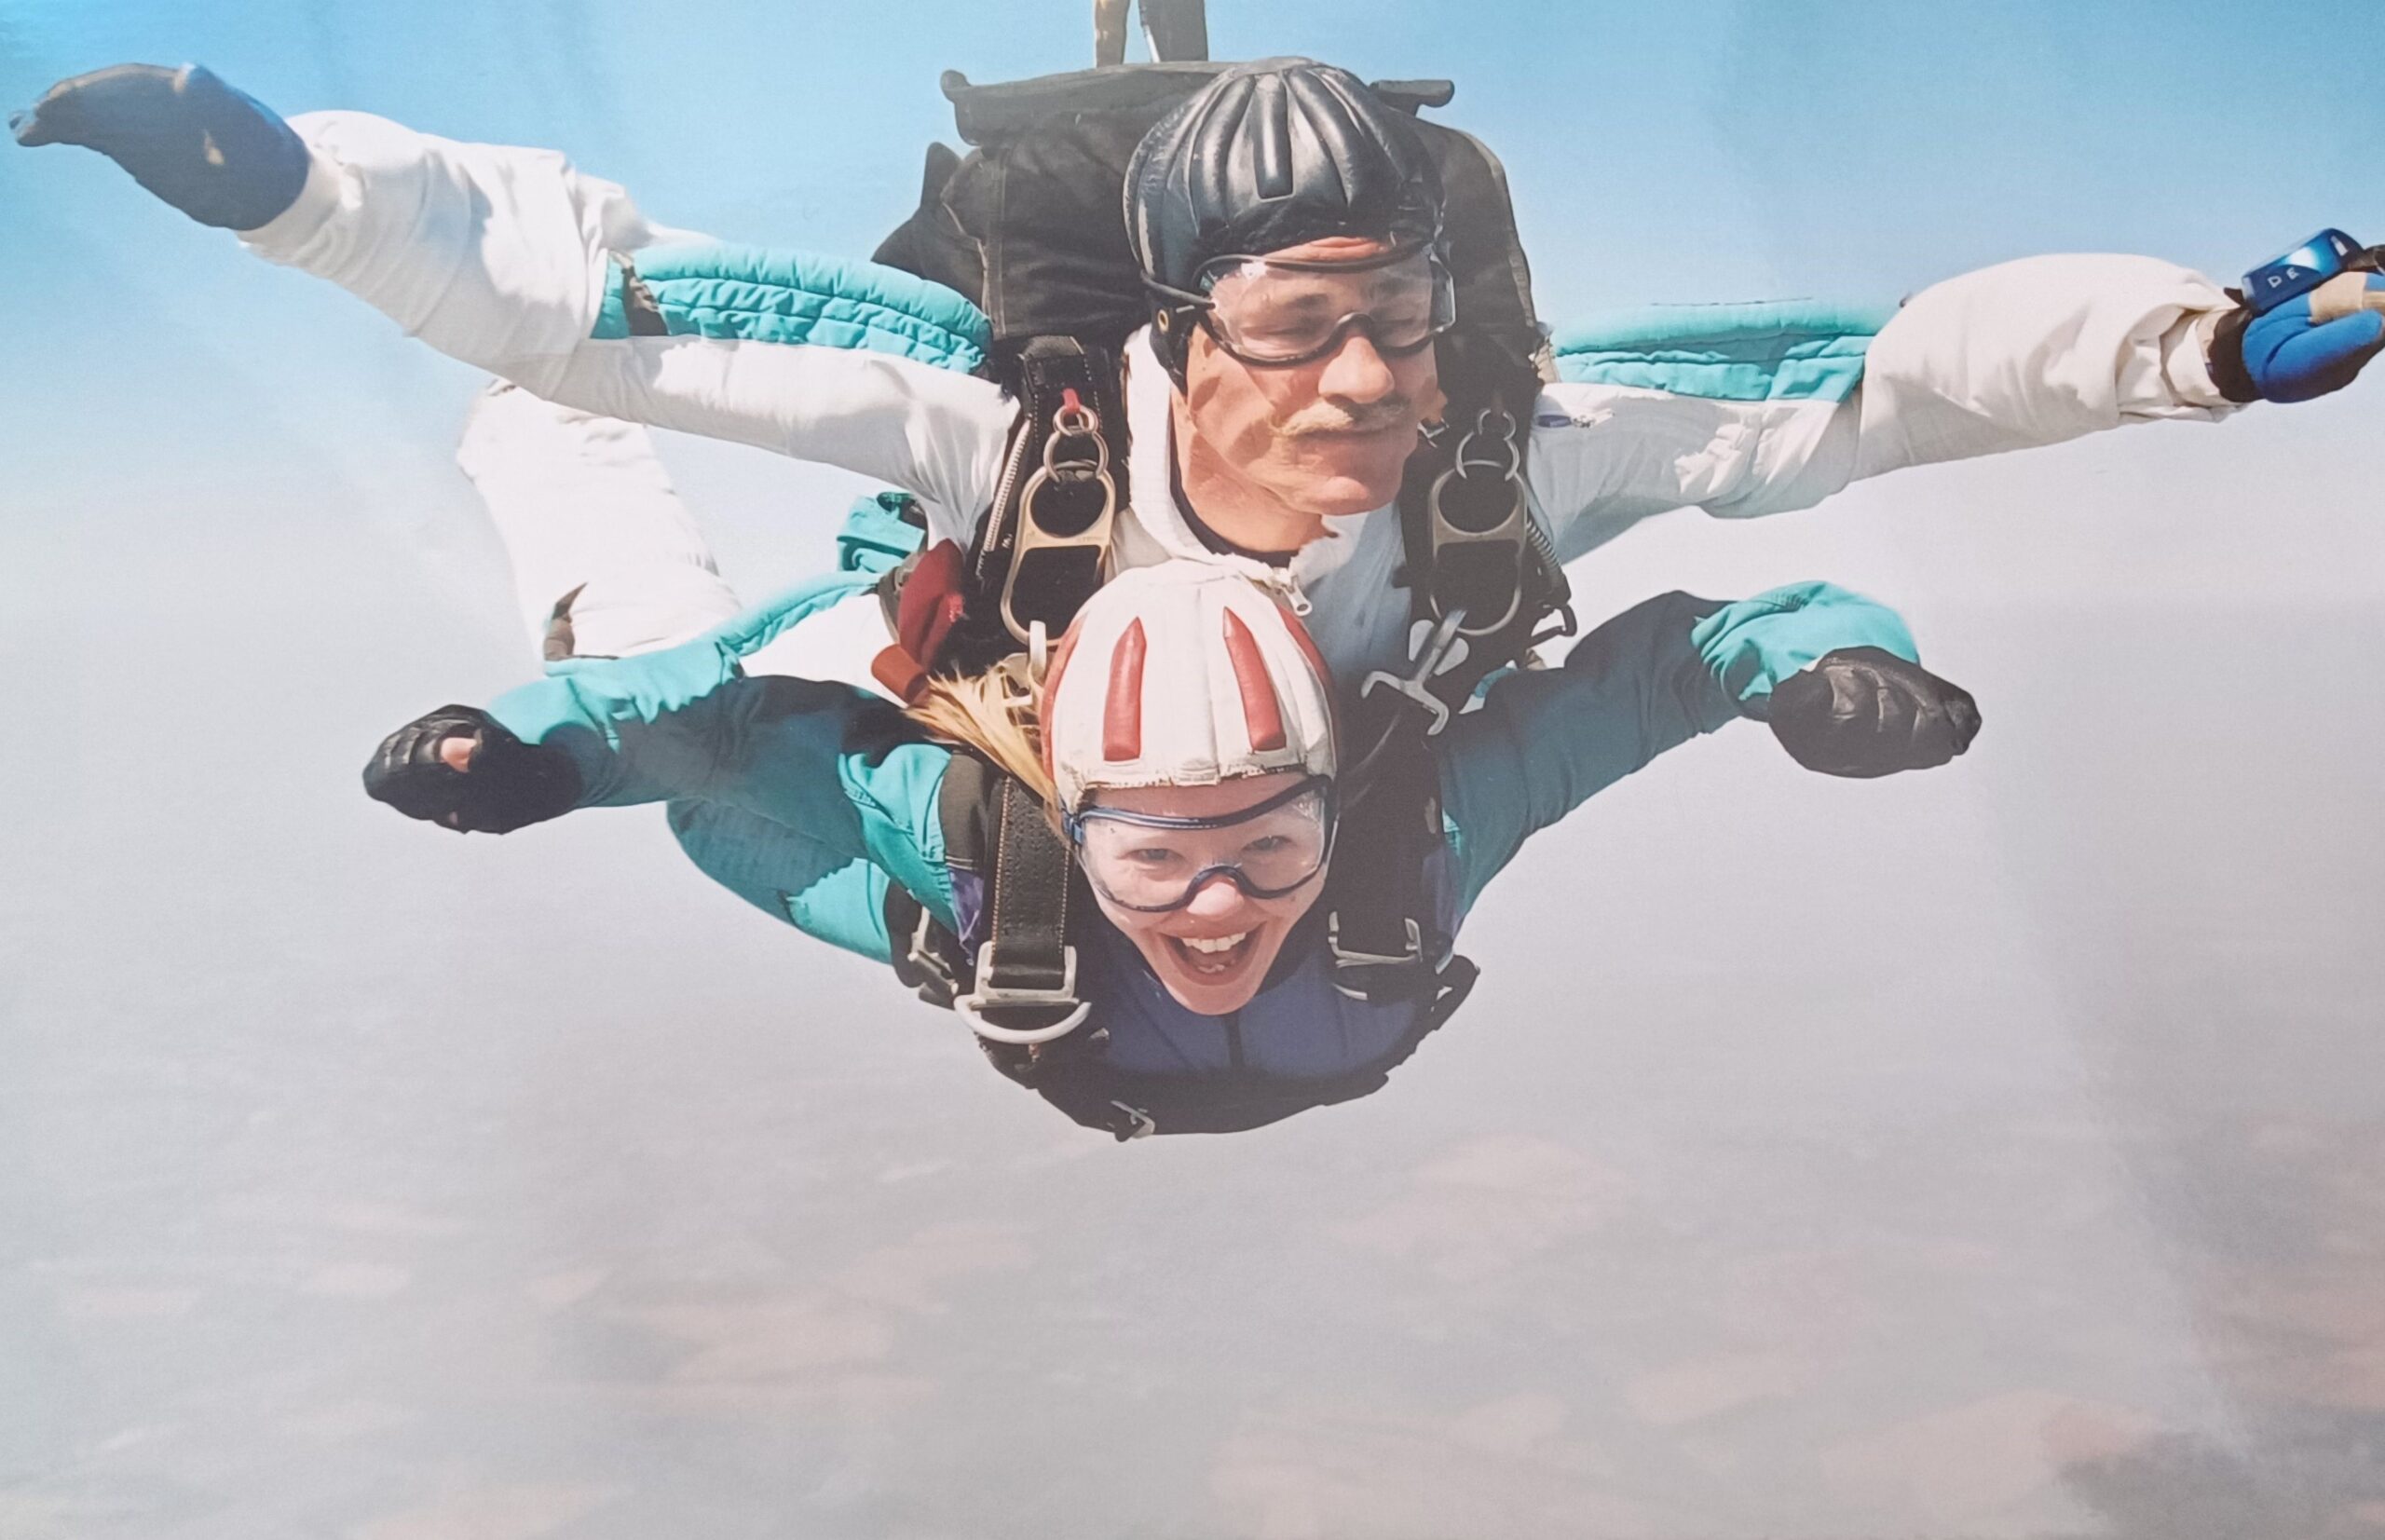 A photograph of a tandem skydive. Toni is attached to the instructor - they both have their arms out and are smiling.